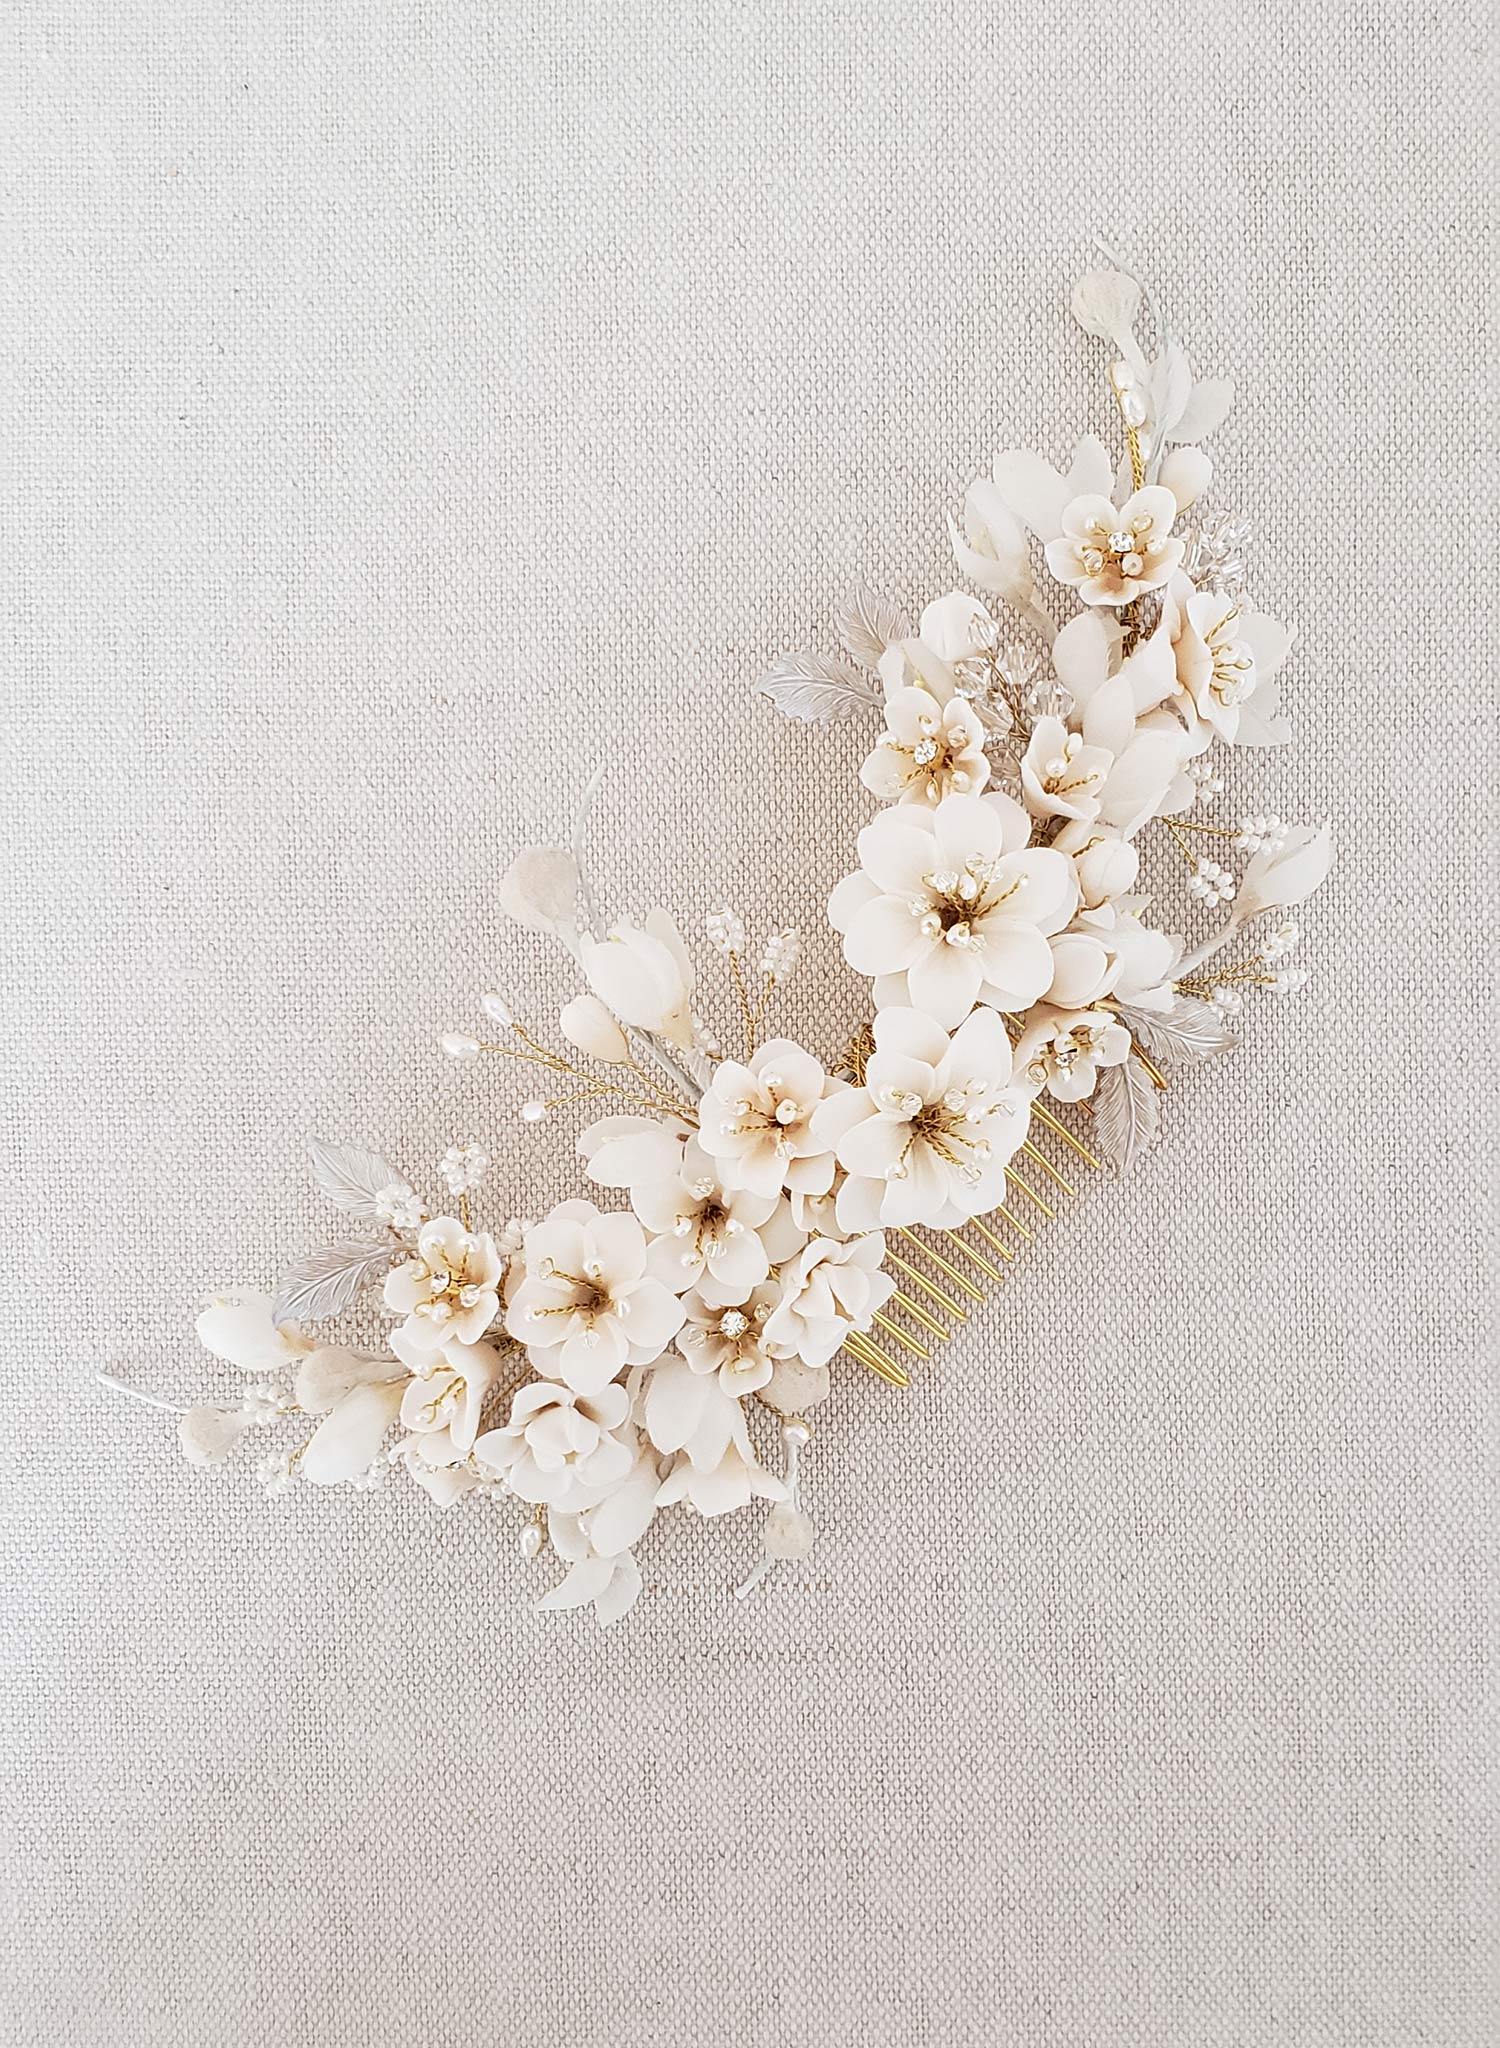 Twigs & Honey Bridal Headpiece, Hair Accessory with Flowers - Double Flower and Pearl Spray Hair Comb - Style #977